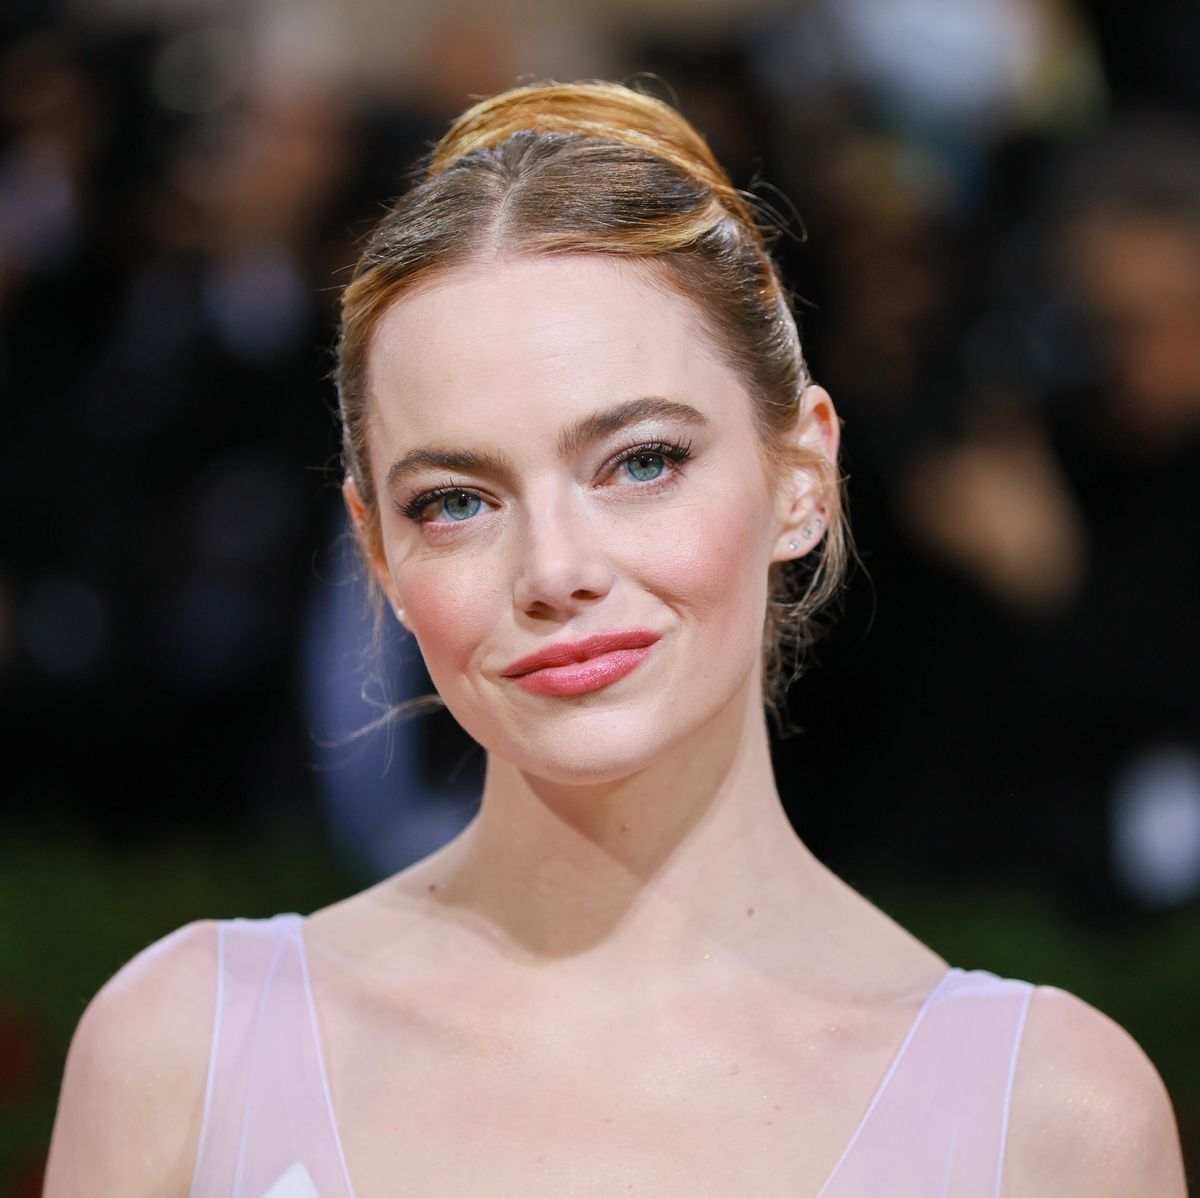 Emma Stone's gorgeous cropped suit is giving us some unbelievable